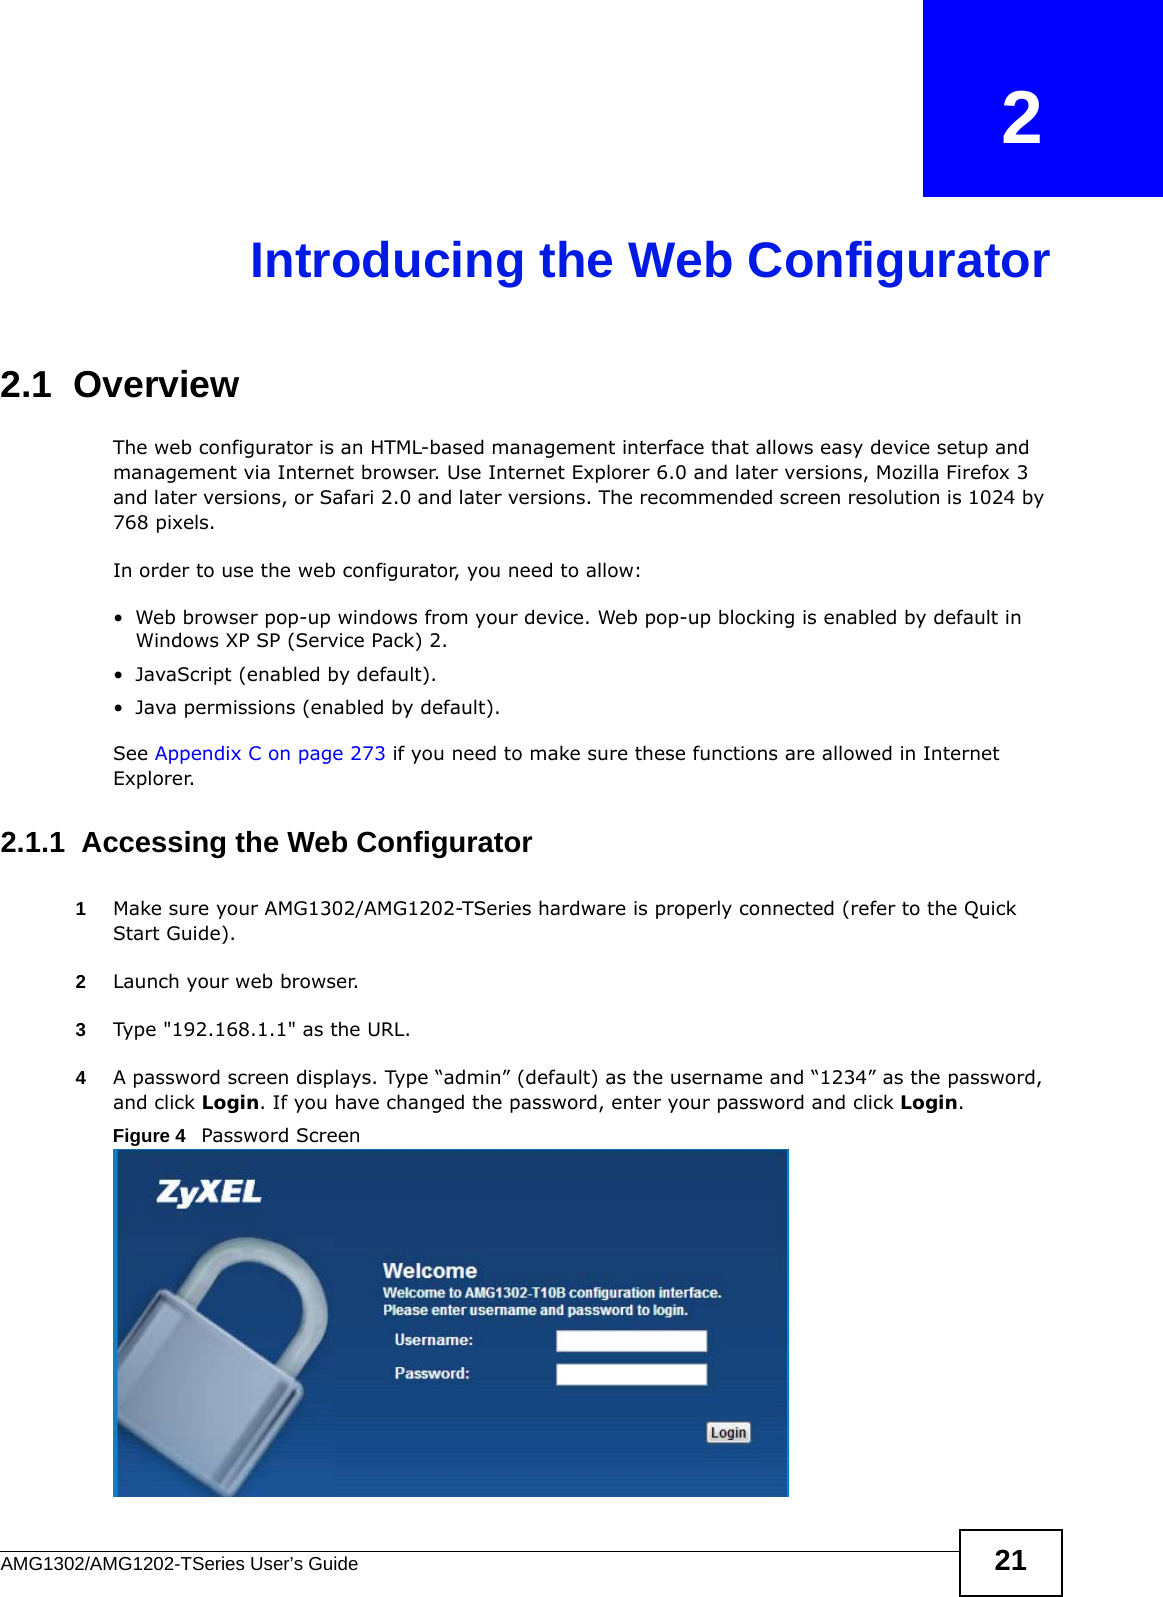 AMG1302/AMG1202-TSeries User’s Guide 21CHAPTER   2Introducing the Web Configurator2.1  OverviewThe web configurator is an HTML-based management interface that allows easy device setup and management via Internet browser. Use Internet Explorer 6.0 and later versions, Mozilla Firefox 3 and later versions, or Safari 2.0 and later versions. The recommended screen resolution is 1024 by 768 pixels.In order to use the web configurator, you need to allow:• Web browser pop-up windows from your device. Web pop-up blocking is enabled by default in Windows XP SP (Service Pack) 2.• JavaScript (enabled by default).• Java permissions (enabled by default).See Appendix C on page 273 if you need to make sure these functions are allowed in Internet Explorer.2.1.1  Accessing the Web Configurator1Make sure your AMG1302/AMG1202-TSeries hardware is properly connected (refer to the Quick Start Guide).2Launch your web browser.3Type &quot;192.168.1.1&quot; as the URL.4A password screen displays. Type “admin” (default) as the username and “1234” as the password, and click Login. If you have changed the password, enter your password and click Login. Figure 4   Password Screen